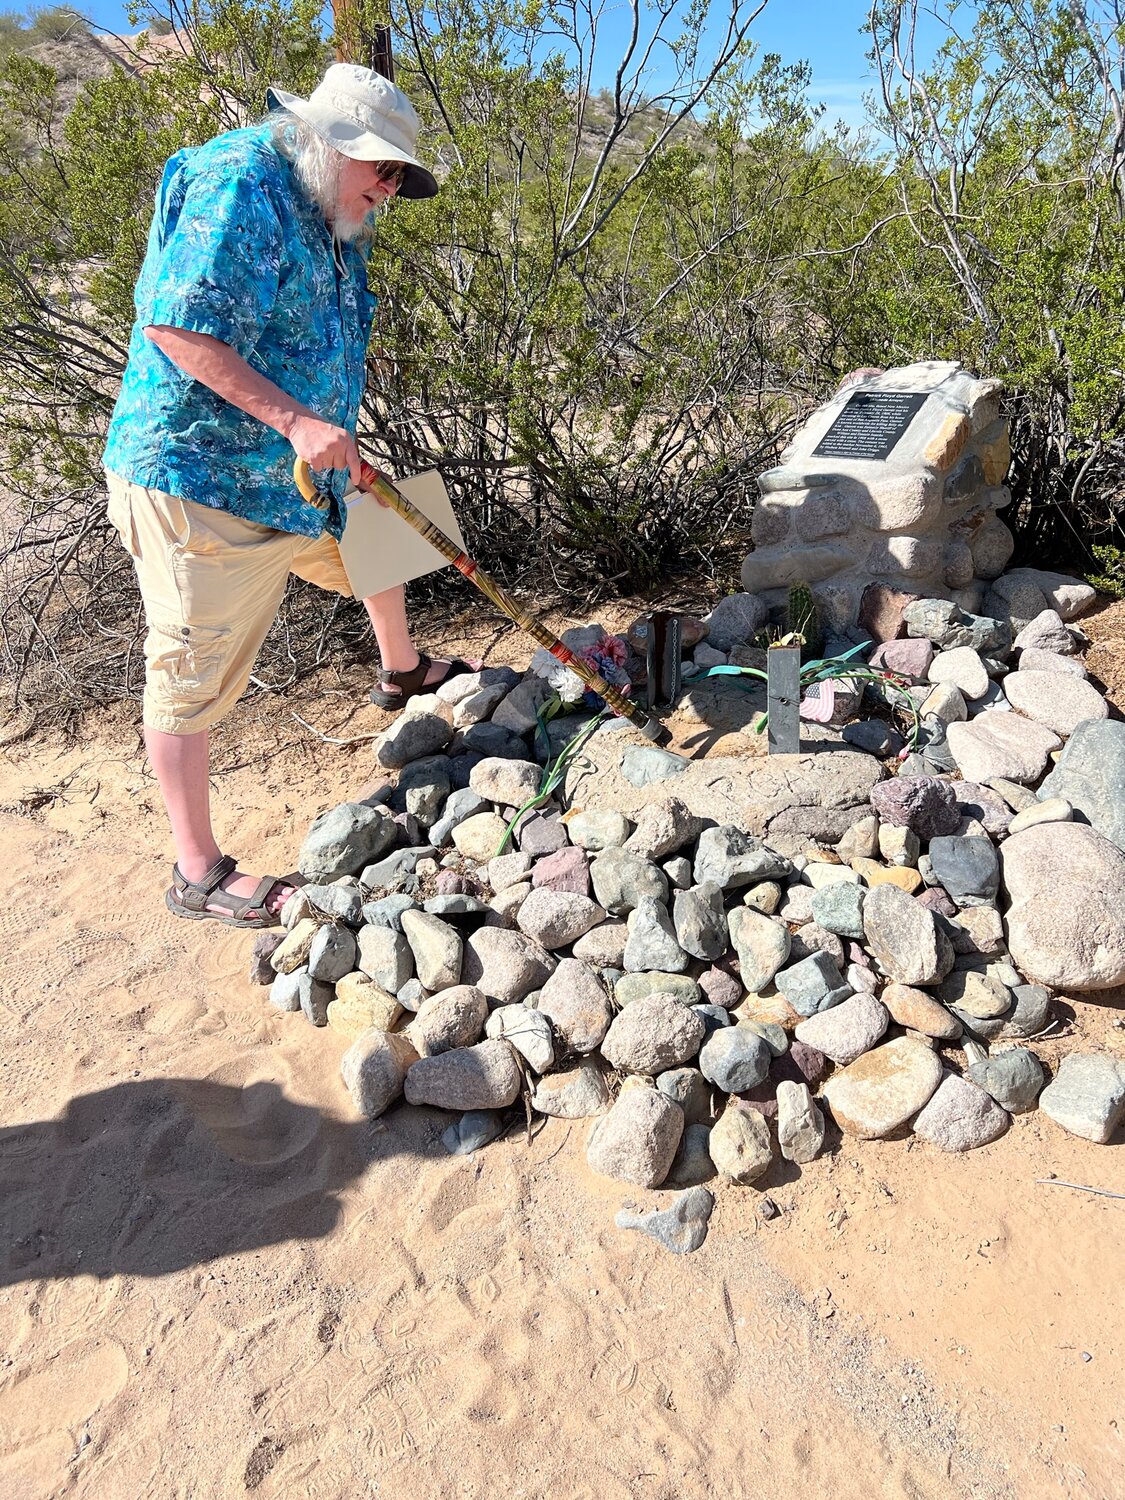 Historian Dave Thomas points out the original stone carved with a cross which marked the location Pat Garrett was killed.